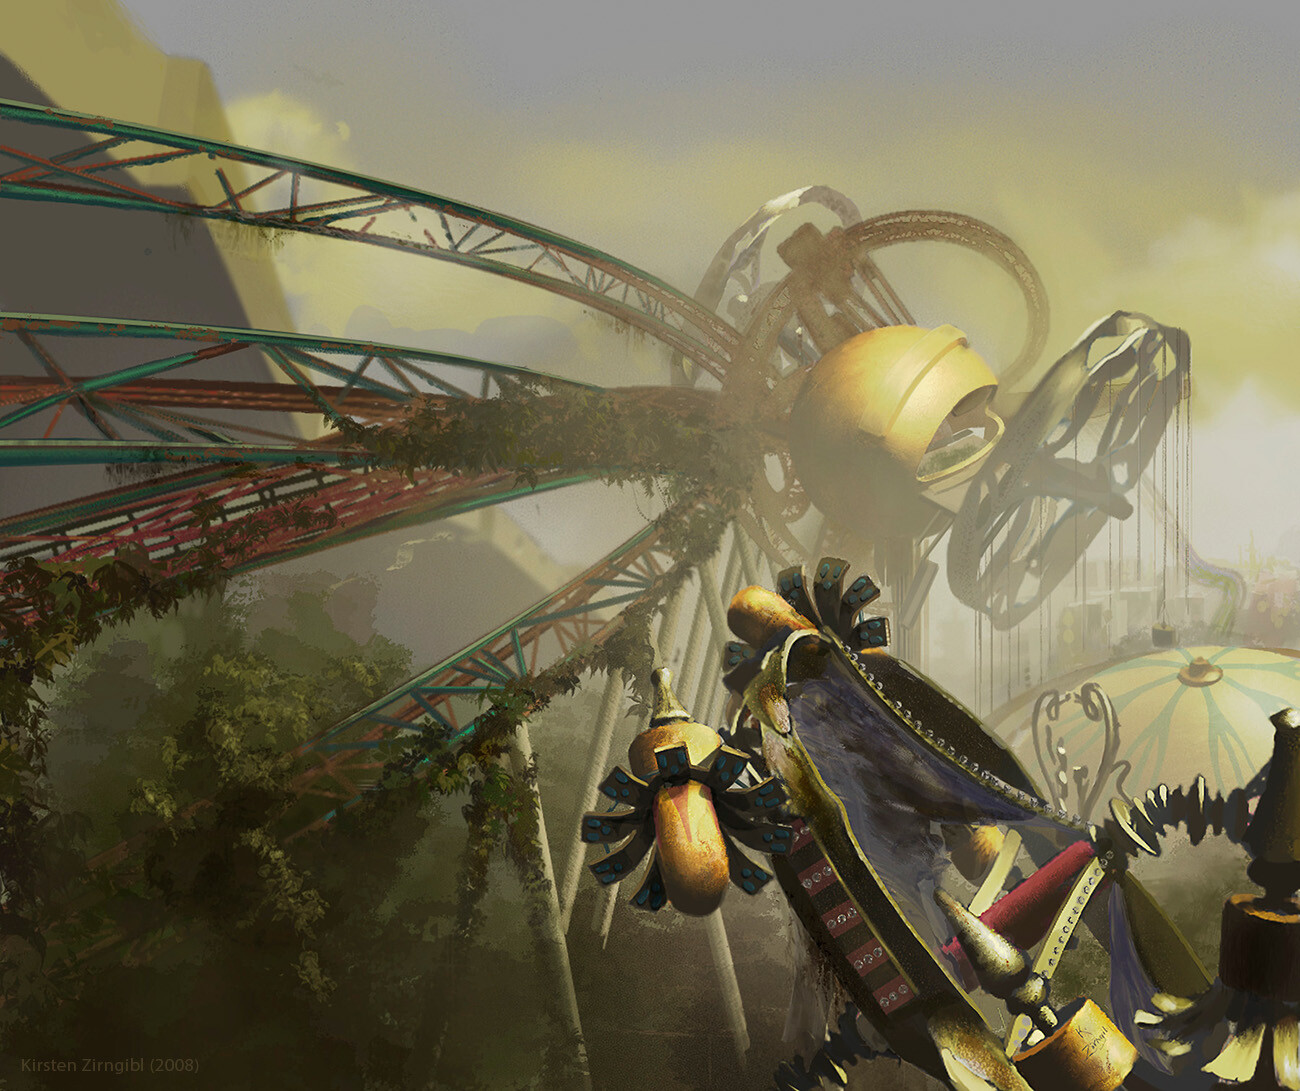 "Abandoned Amusement Park" (2008)
My first imaginative painting in Photoshop!  